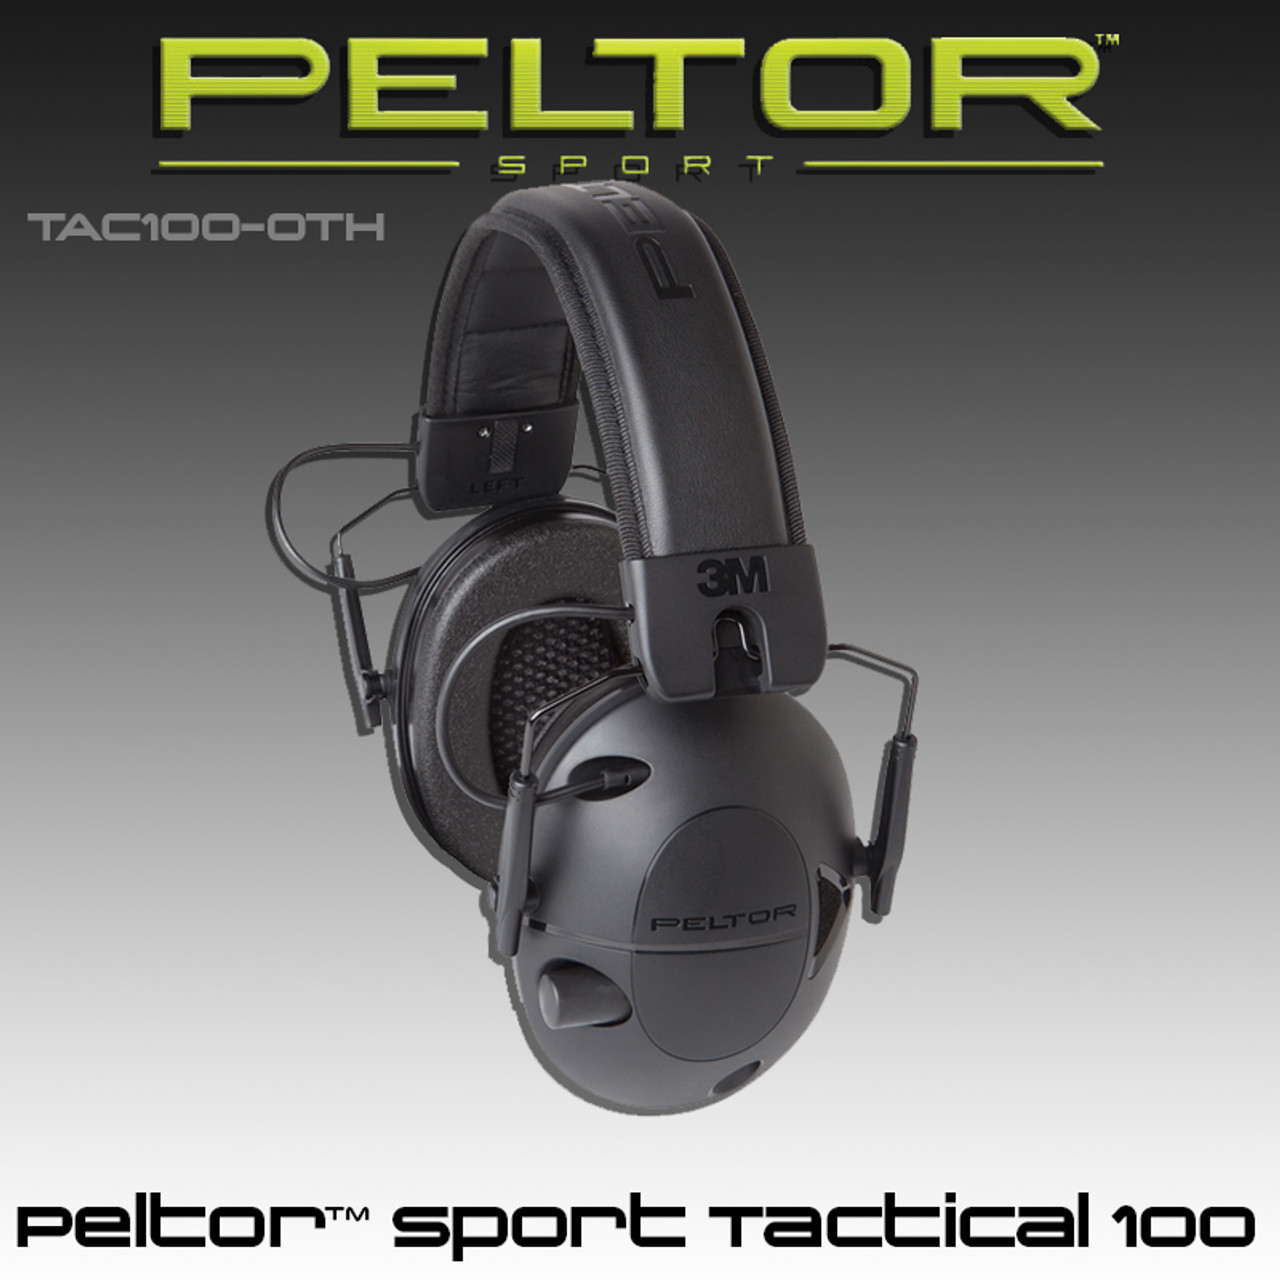 Peltor Sport Tactical 100 Electronic Hearing Protector (TAC100) by 3M - 1